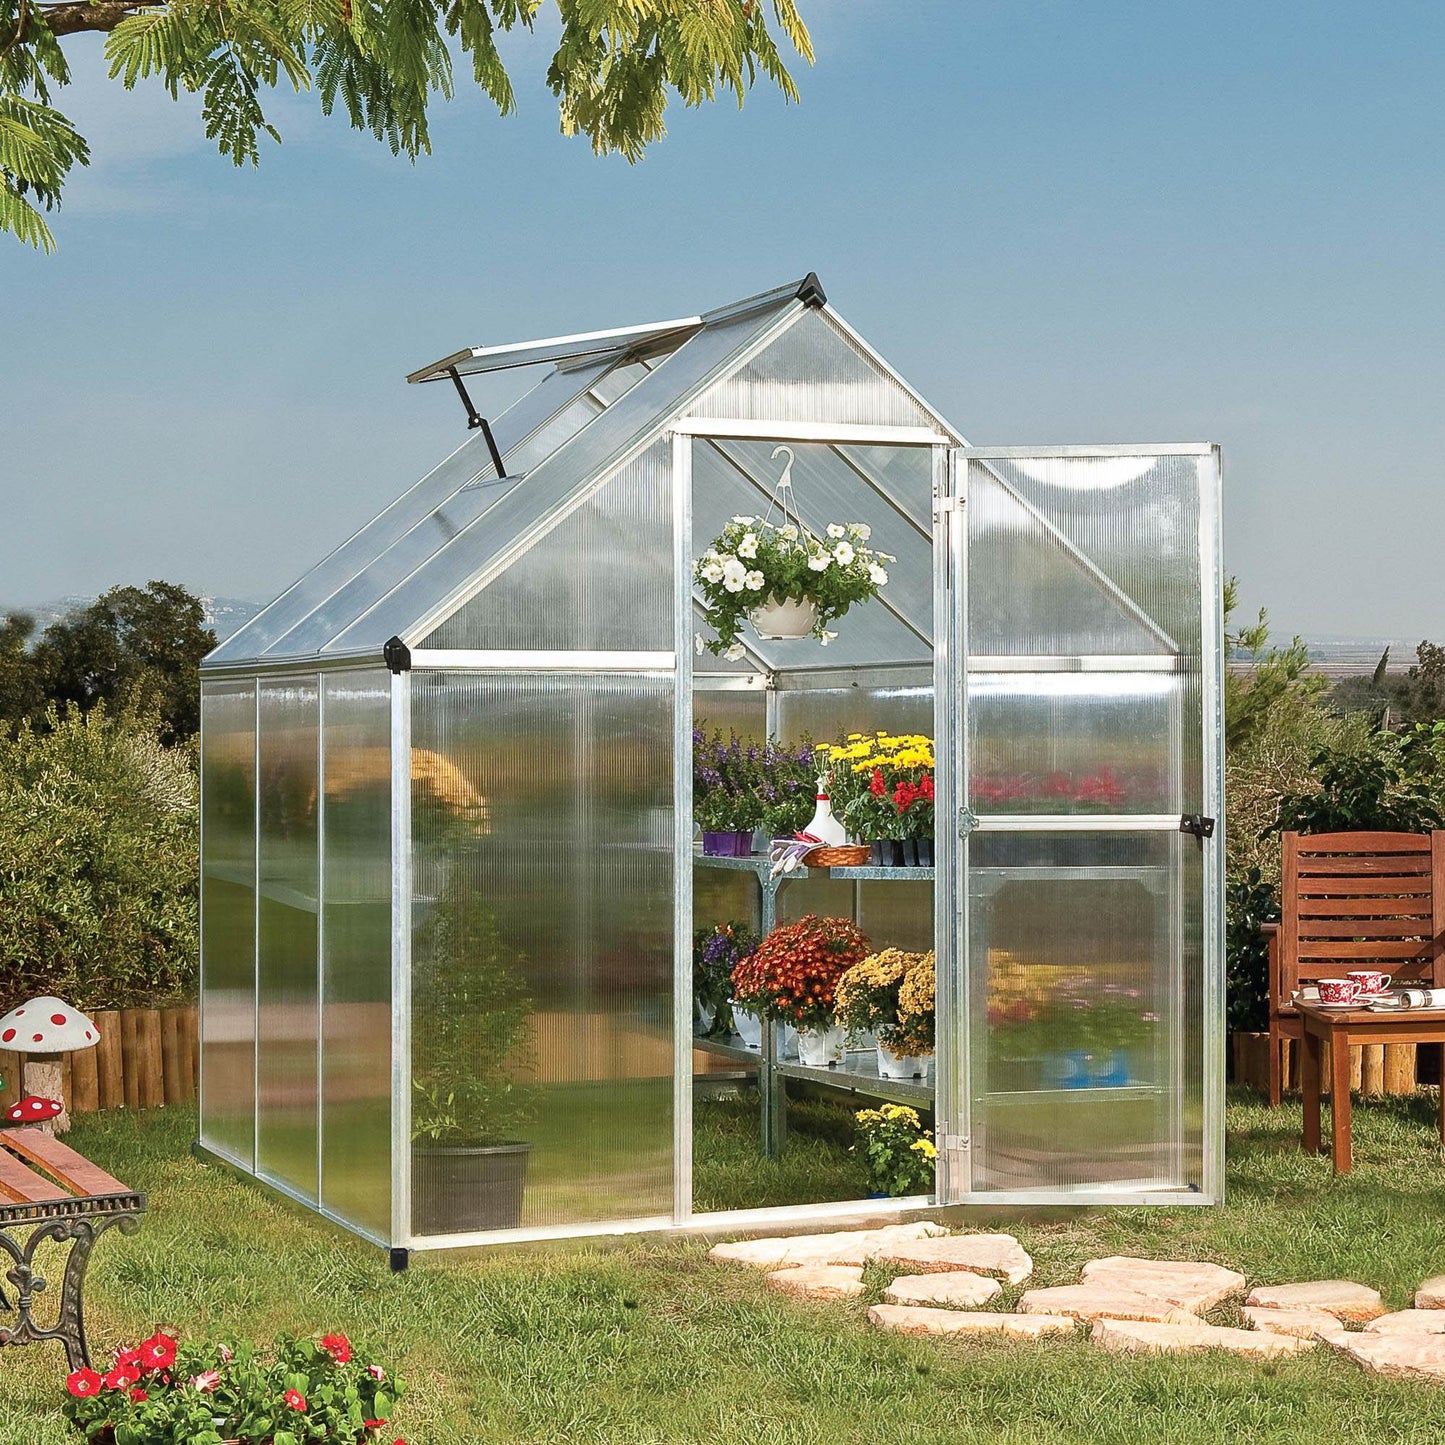 Canopia by Palram Mythos 6 x 6 Greenhouse - Silver